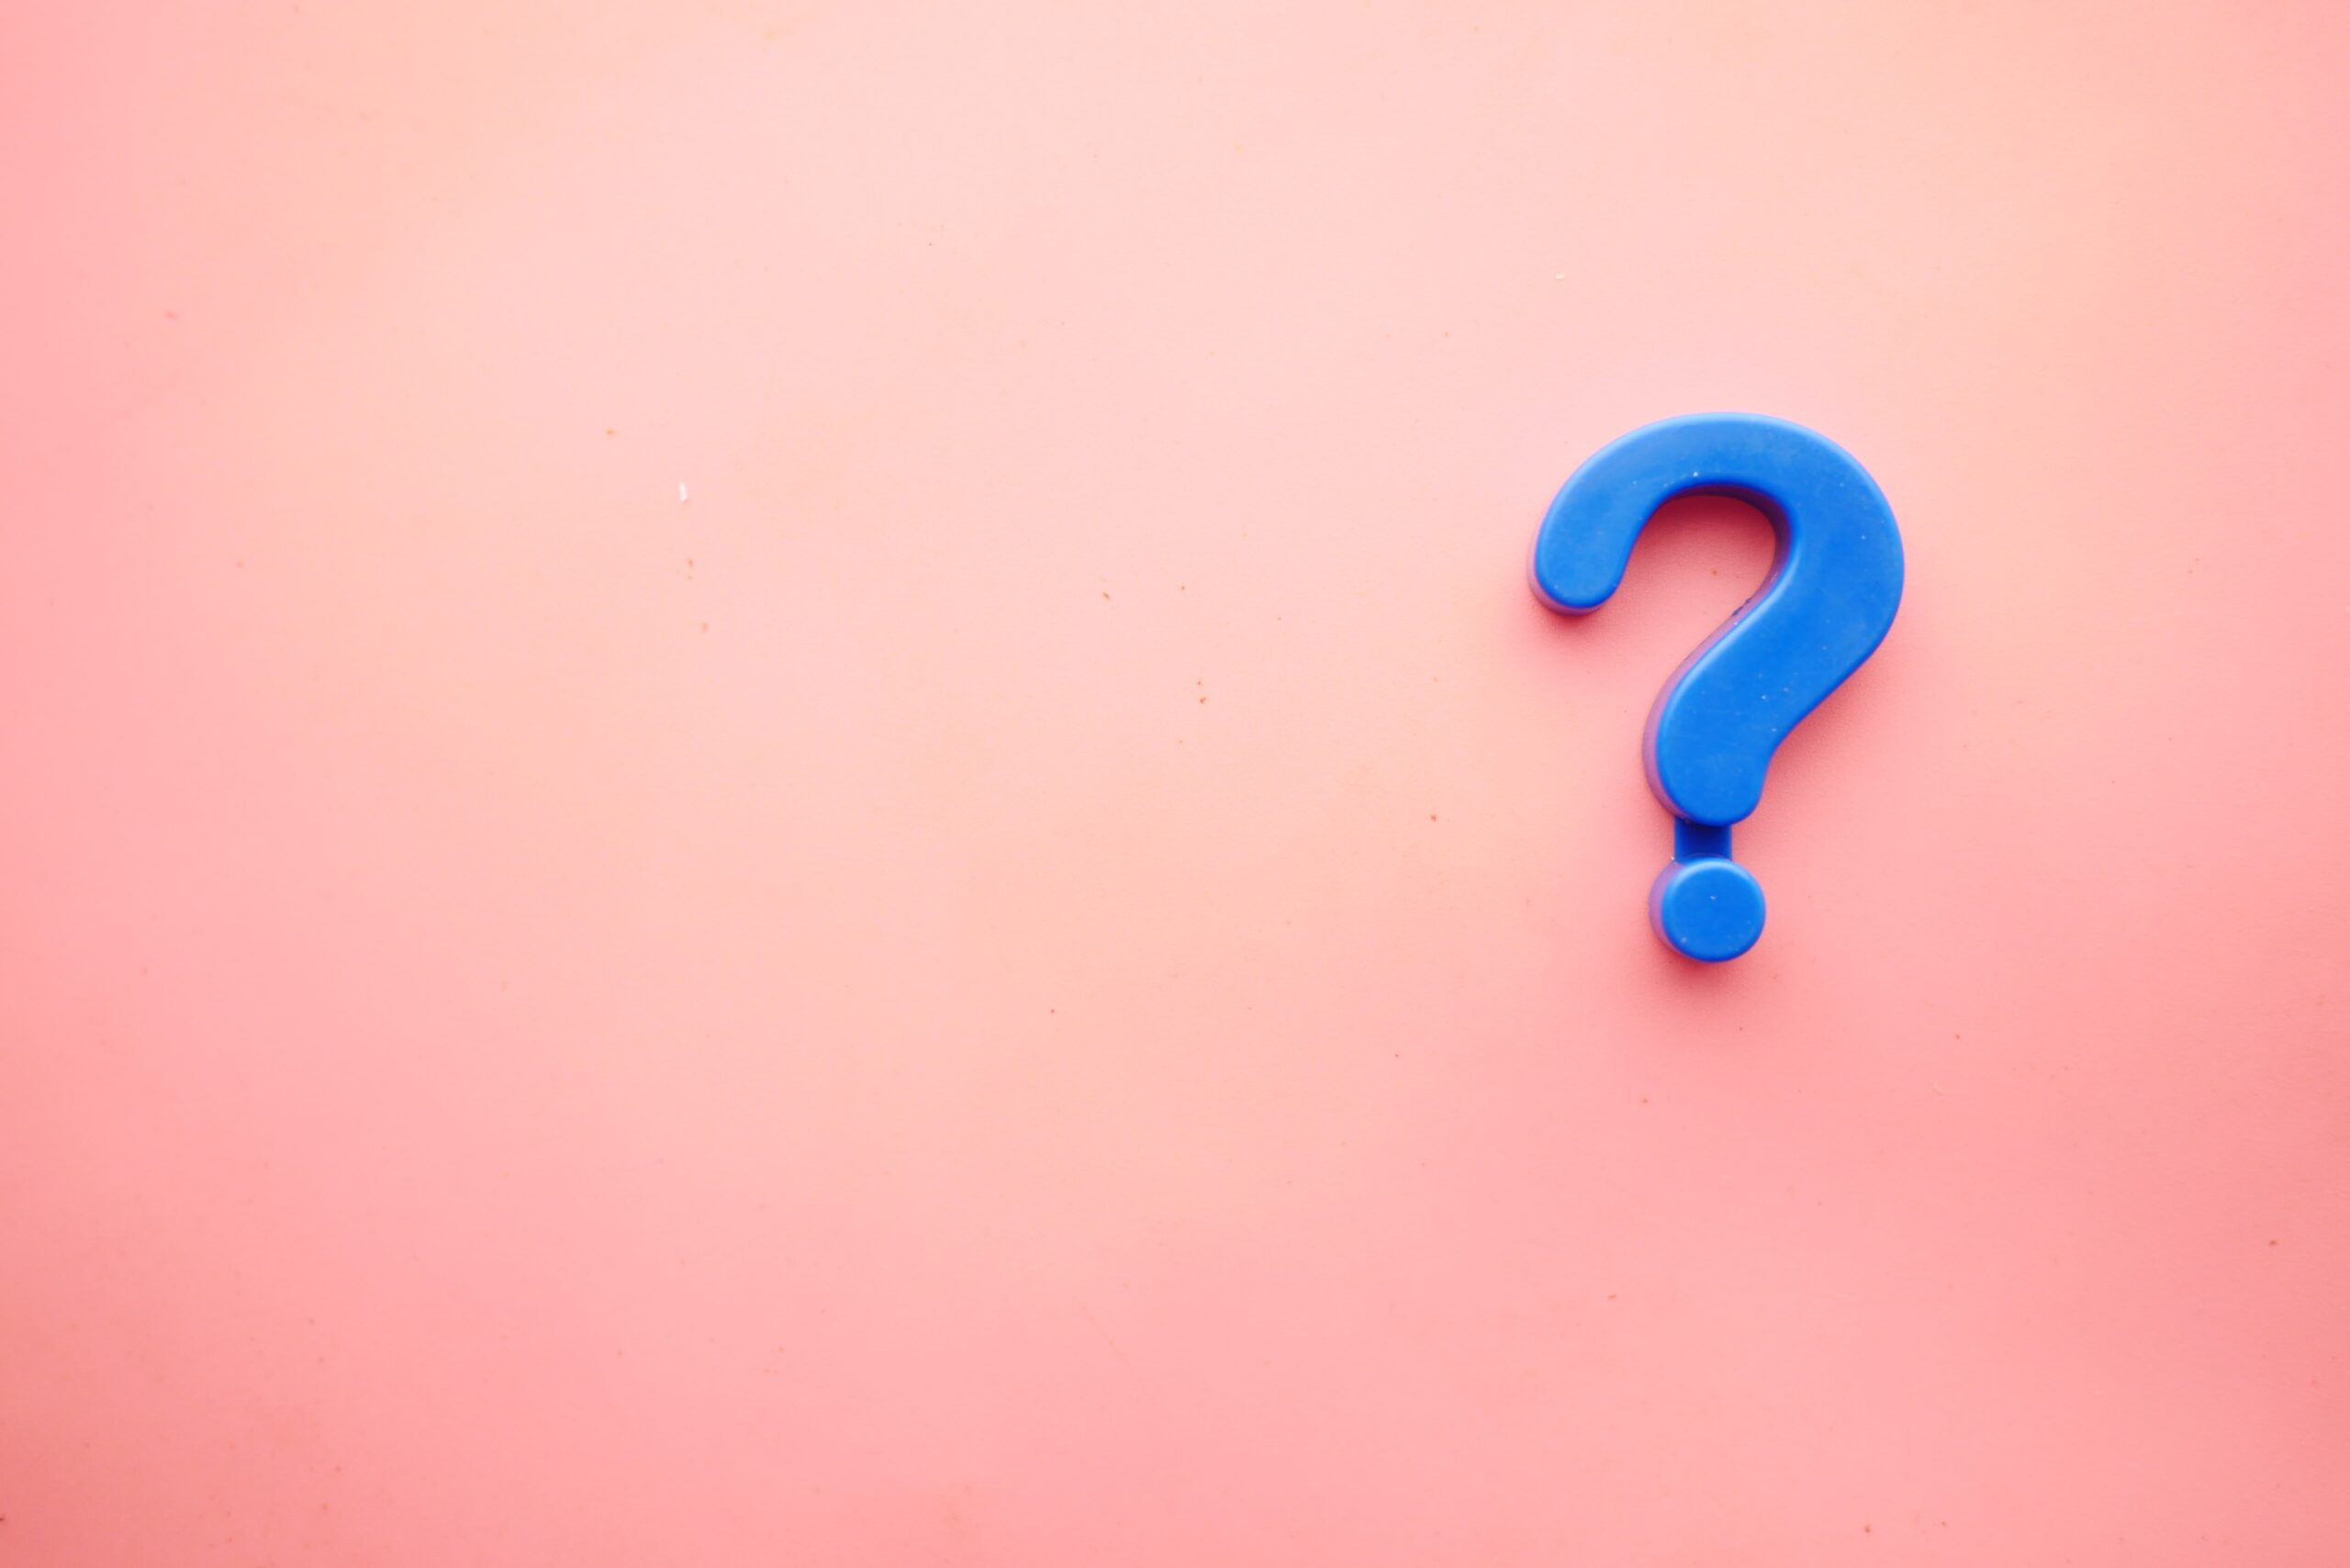 A blue question mark symbol on a pink background